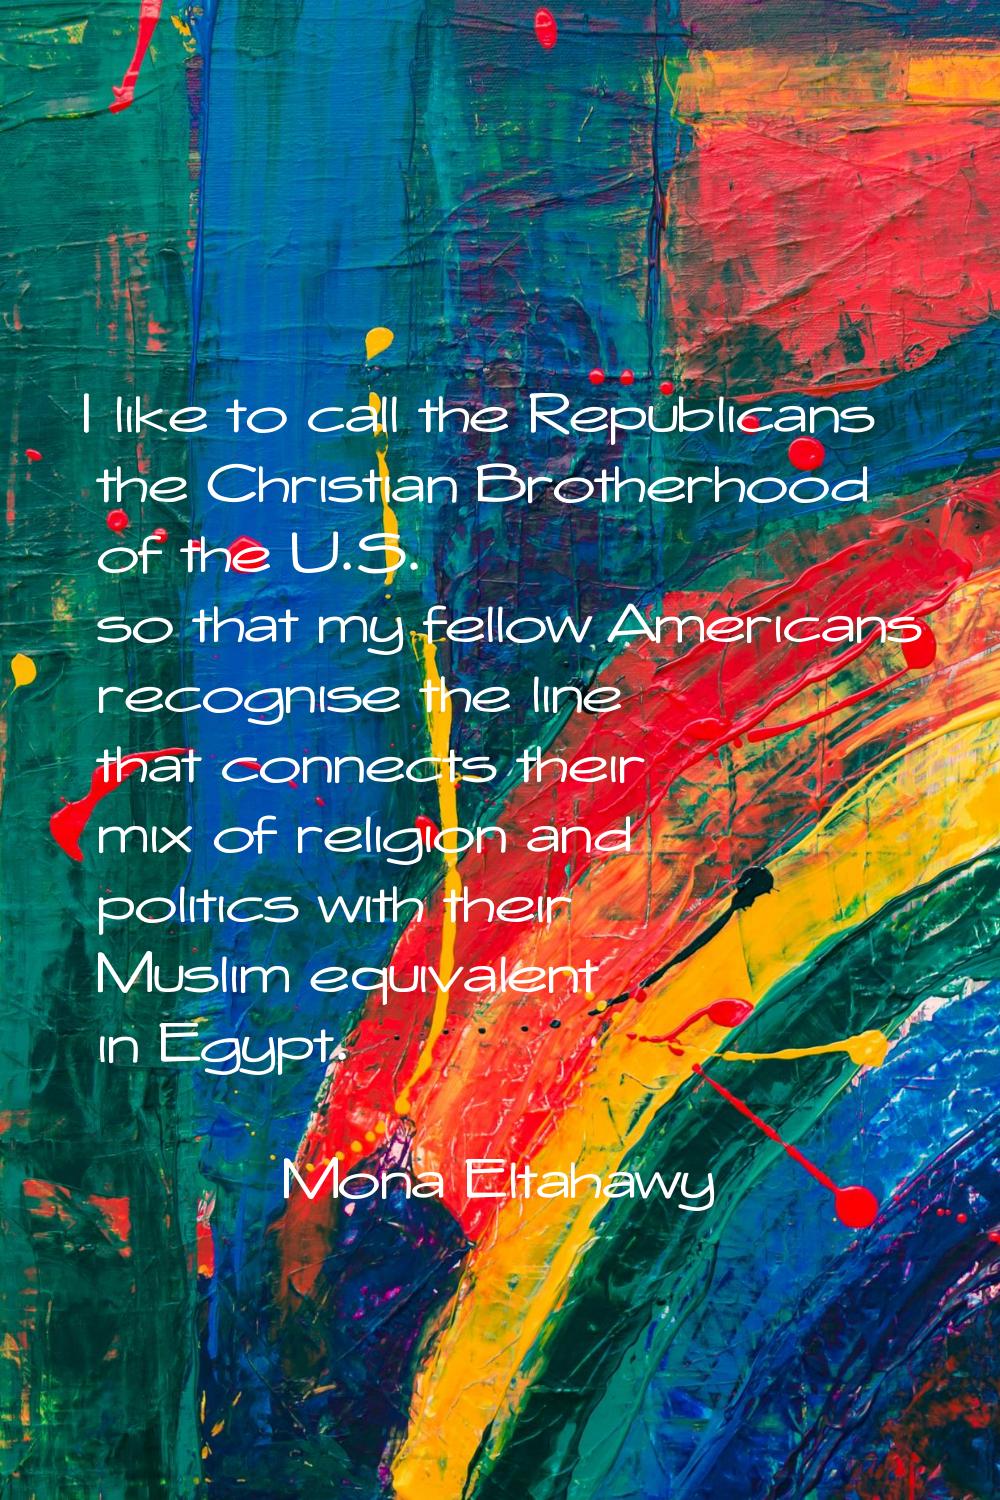 I like to call the Republicans the Christian Brotherhood of the U.S. so that my fellow Americans re